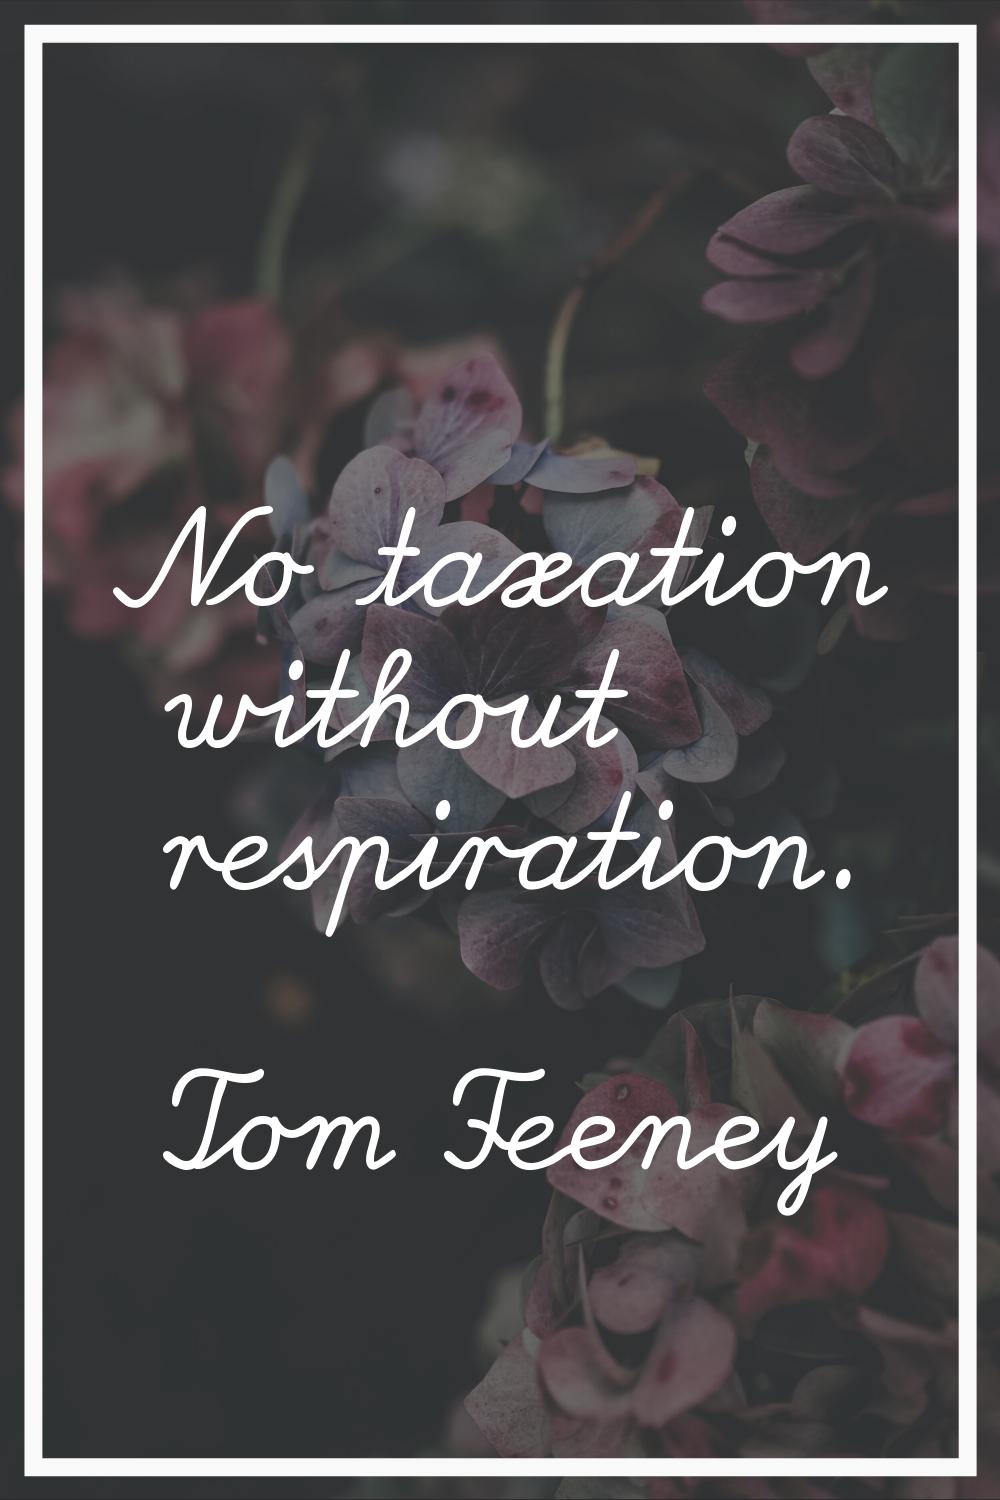 No taxation without respiration.